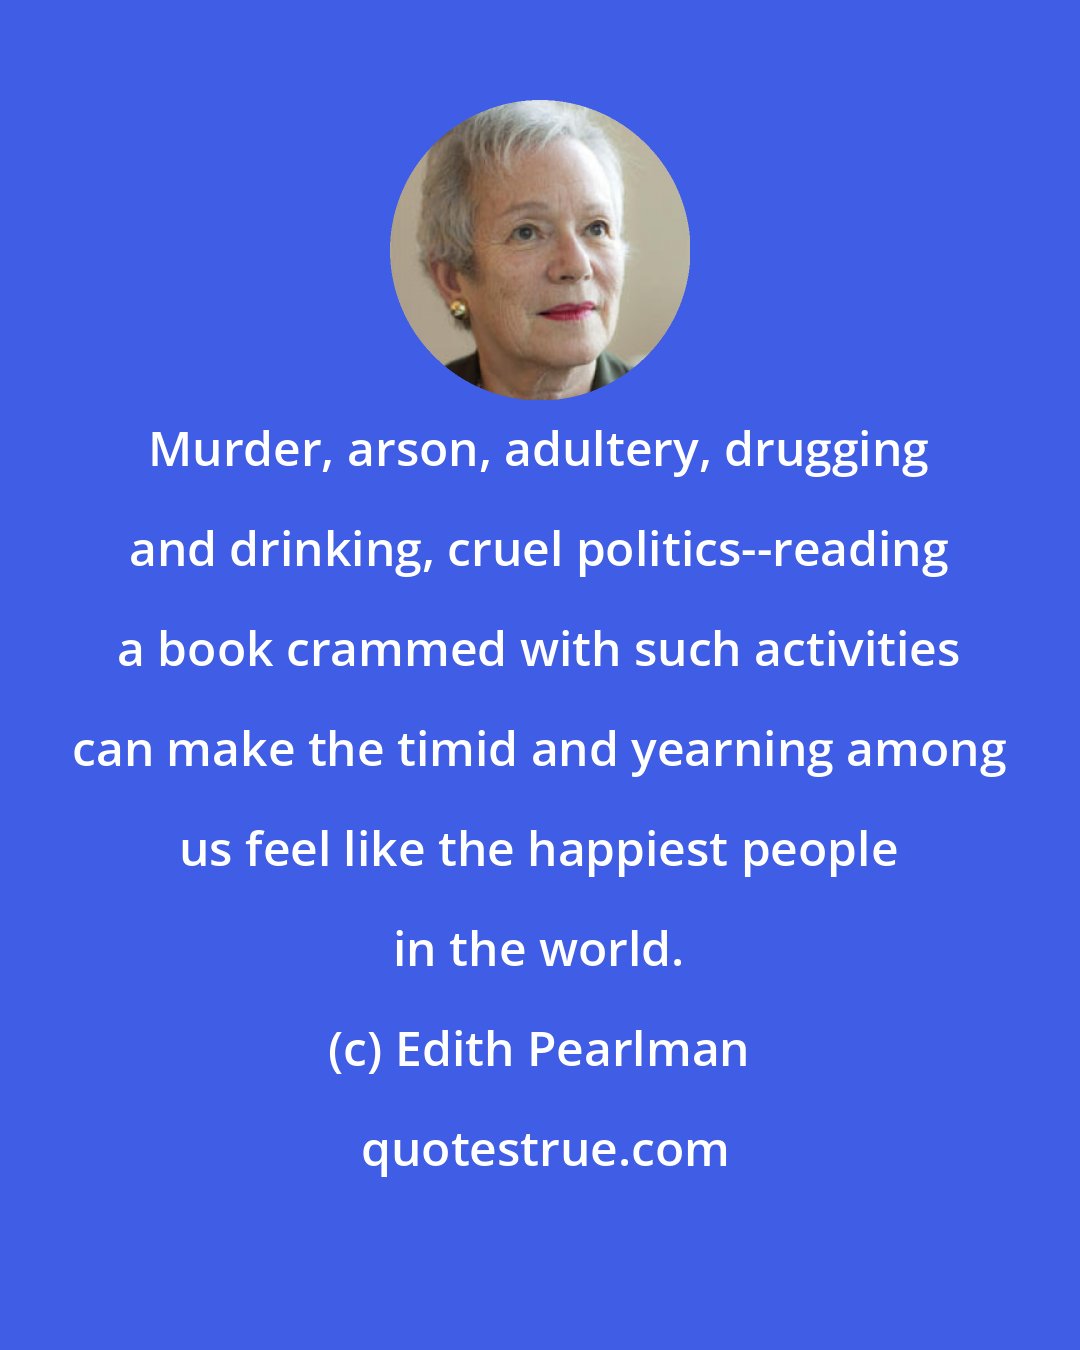 Edith Pearlman: Murder, arson, adultery, drugging and drinking, cruel politics--reading a book crammed with such activities can make the timid and yearning among us feel like the happiest people in the world.